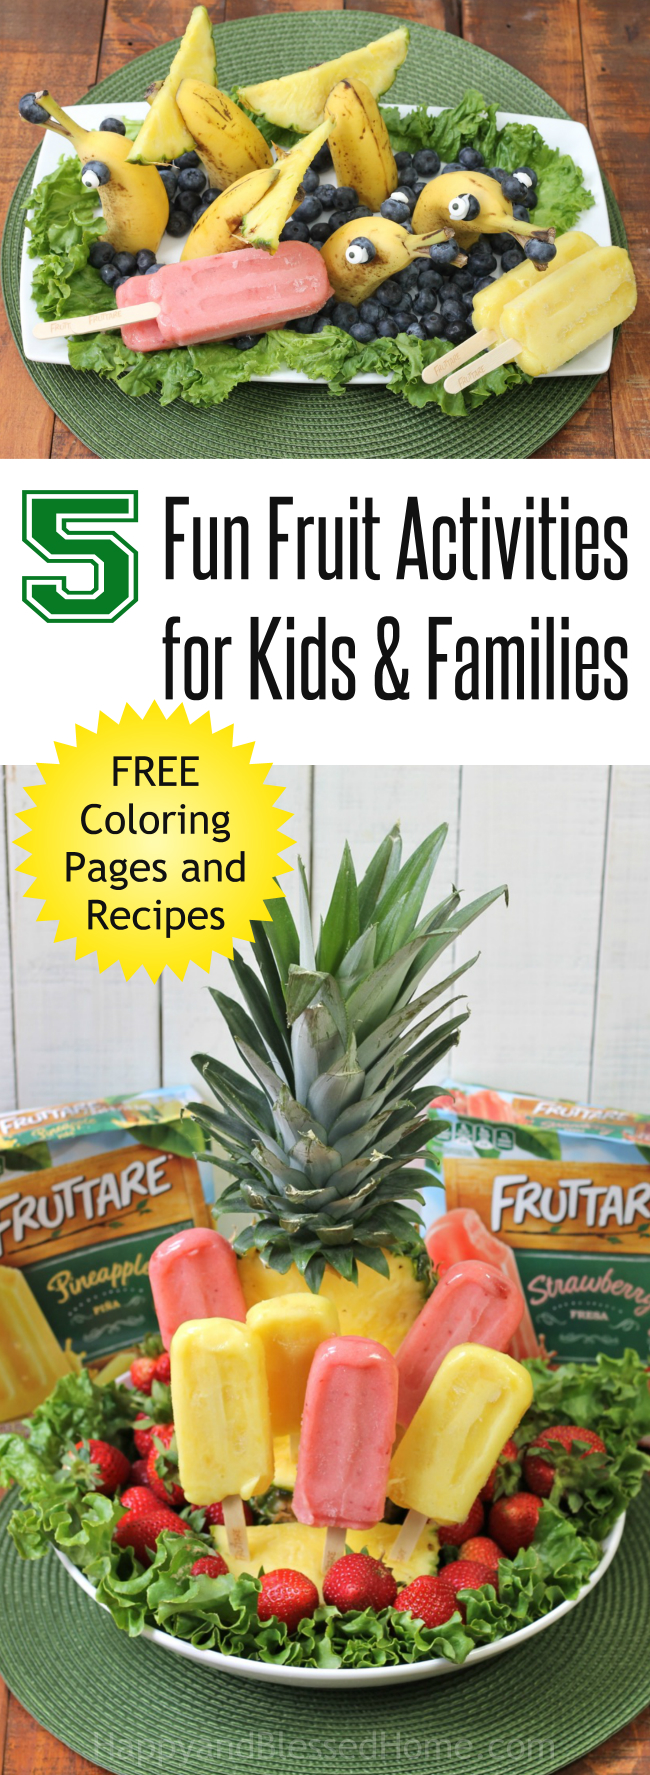 5 Fun Fruit Activities for Kids and Families with easy recipes free coloring and craft ideas from HappyandBlessedHome.com